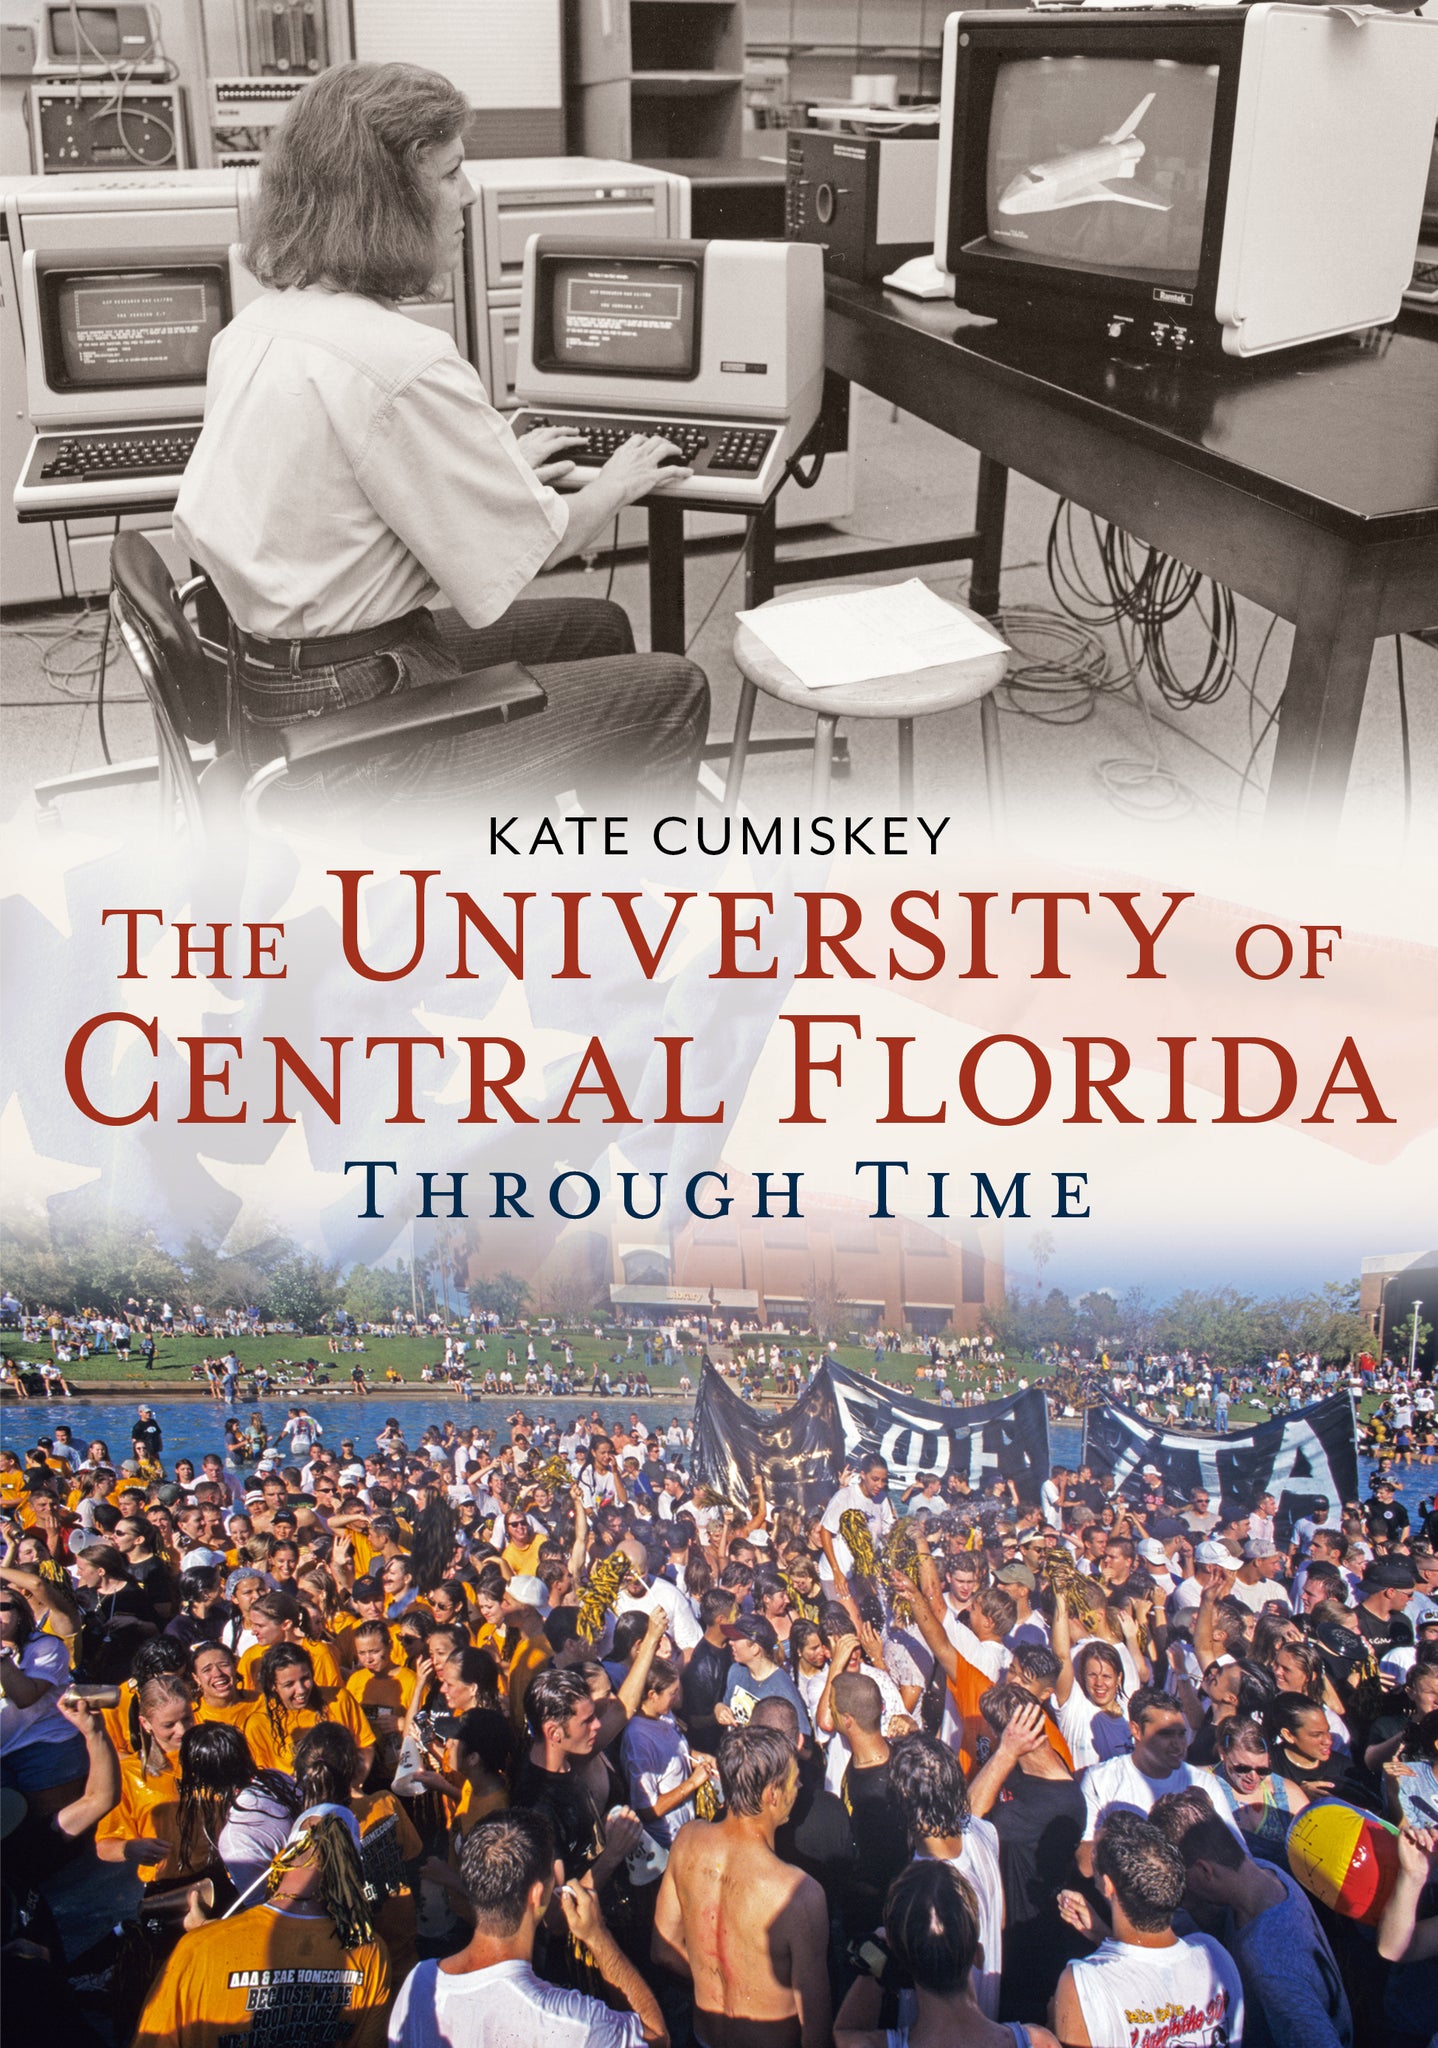 The University of Central Florida Through Time